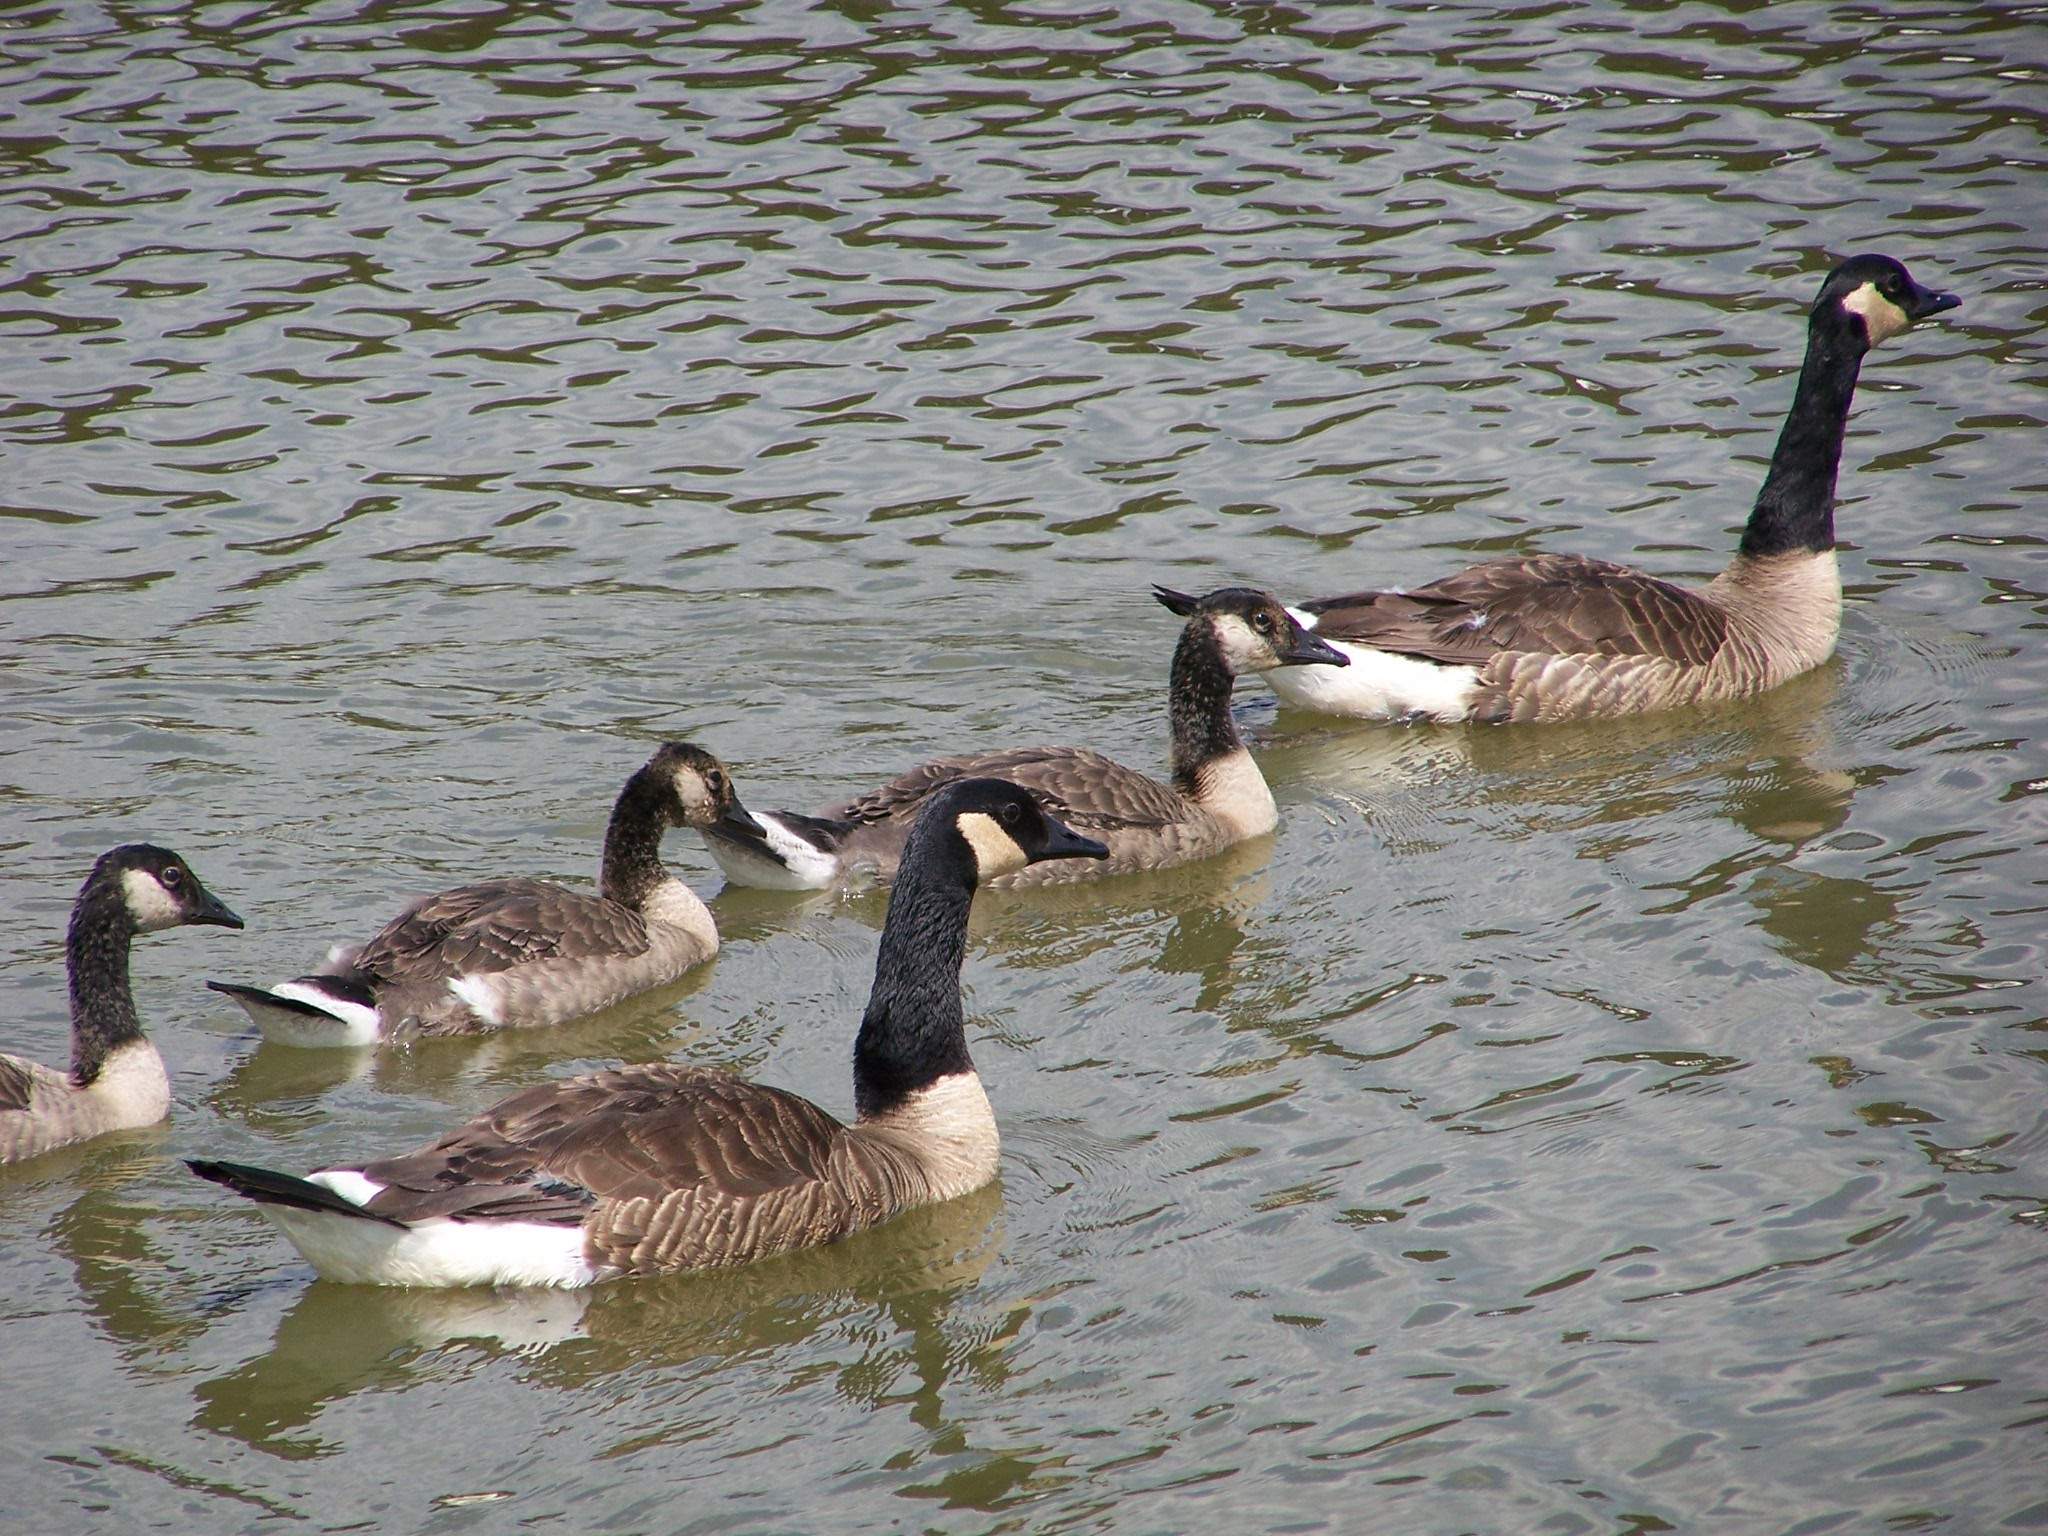 A group of geese in the water at Cache River Wetlands